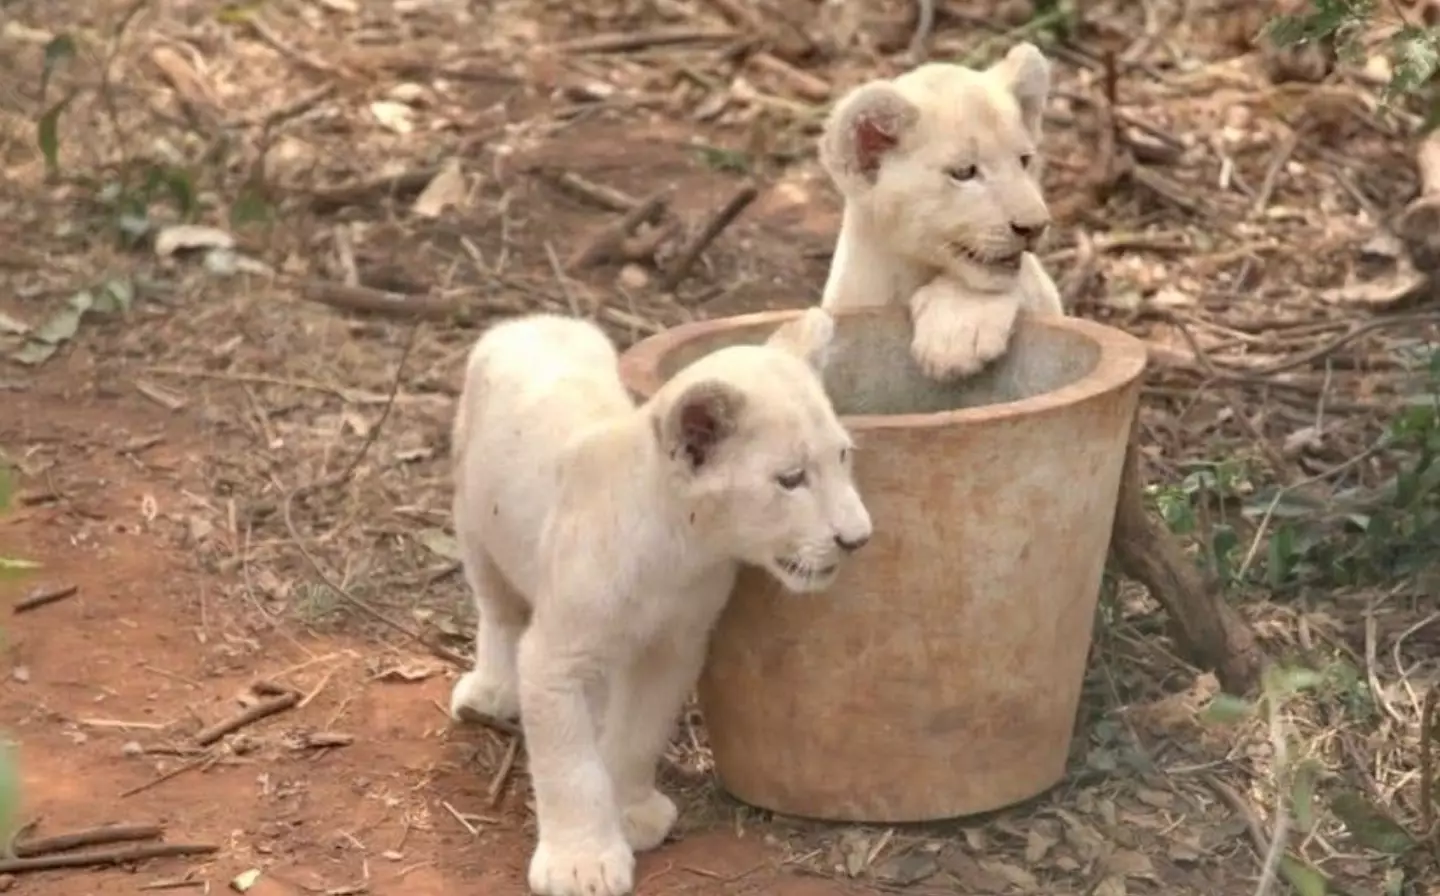 The zoo is home to two white lion cubs.